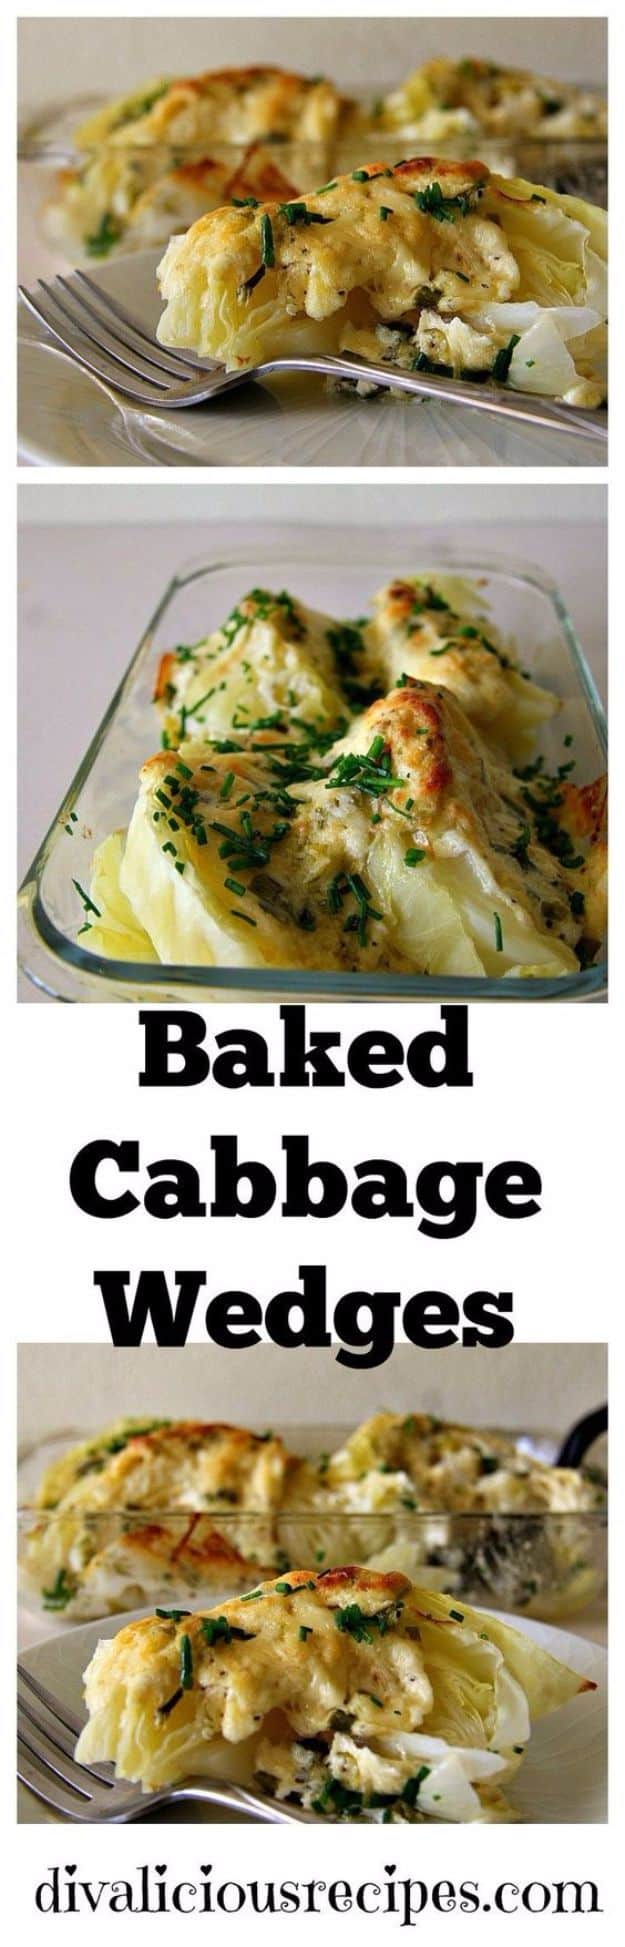 Best Thanksgiving Side Dishes - Baked Cabbage Wedges - Easy Make Ahead and Crockpot Versions of the Best Thanksgiving Recipes #thanksgiving #recipes